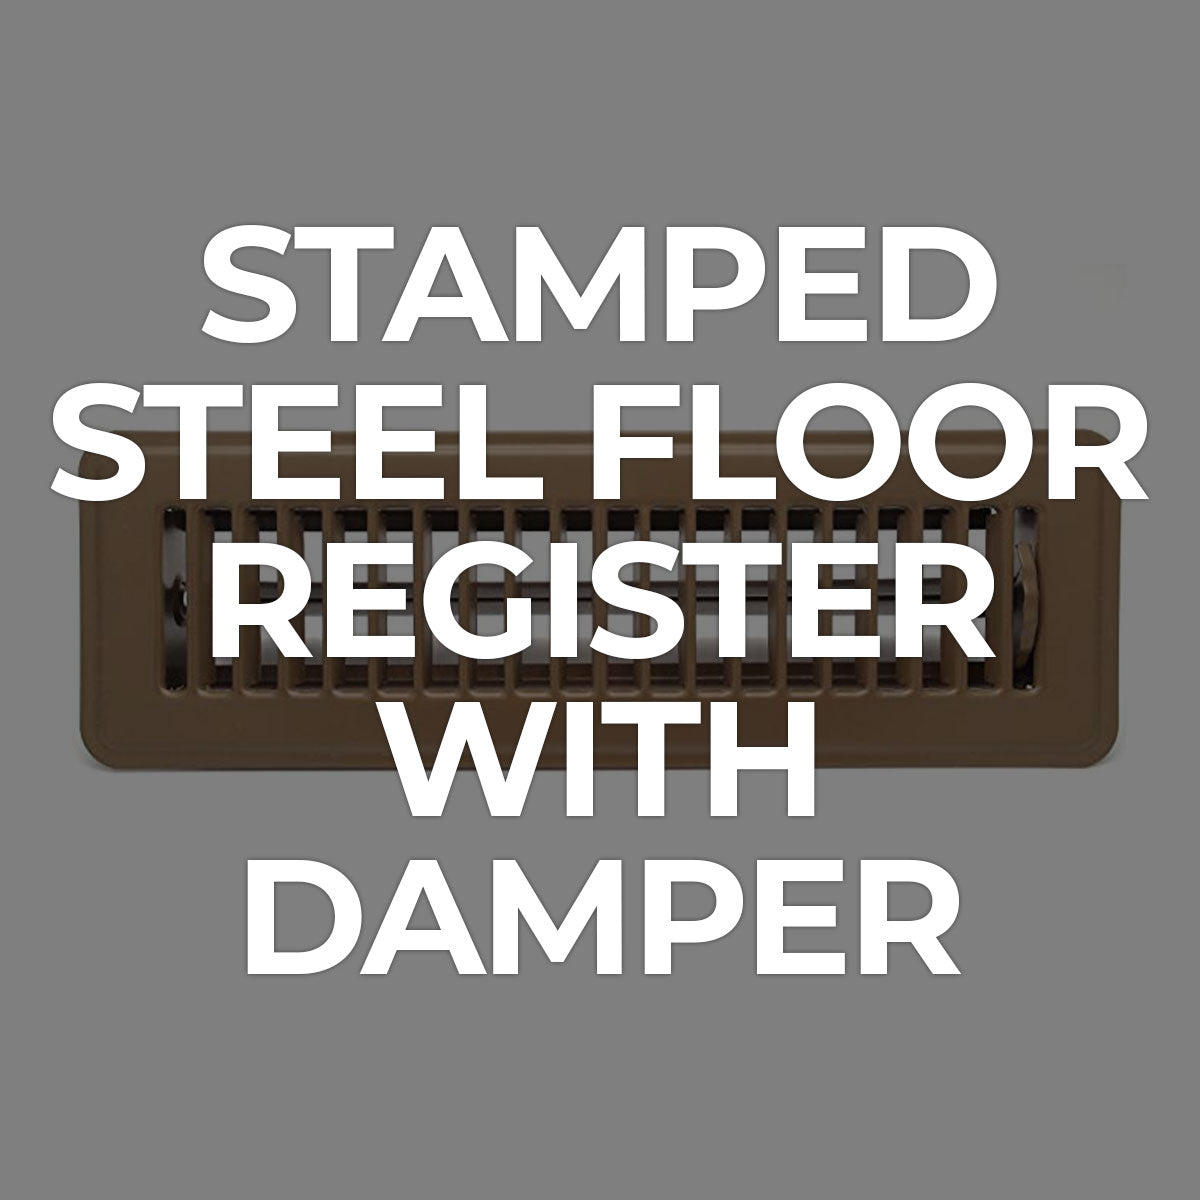 Search by Collections: Stamped Steel Floor Register with Damper